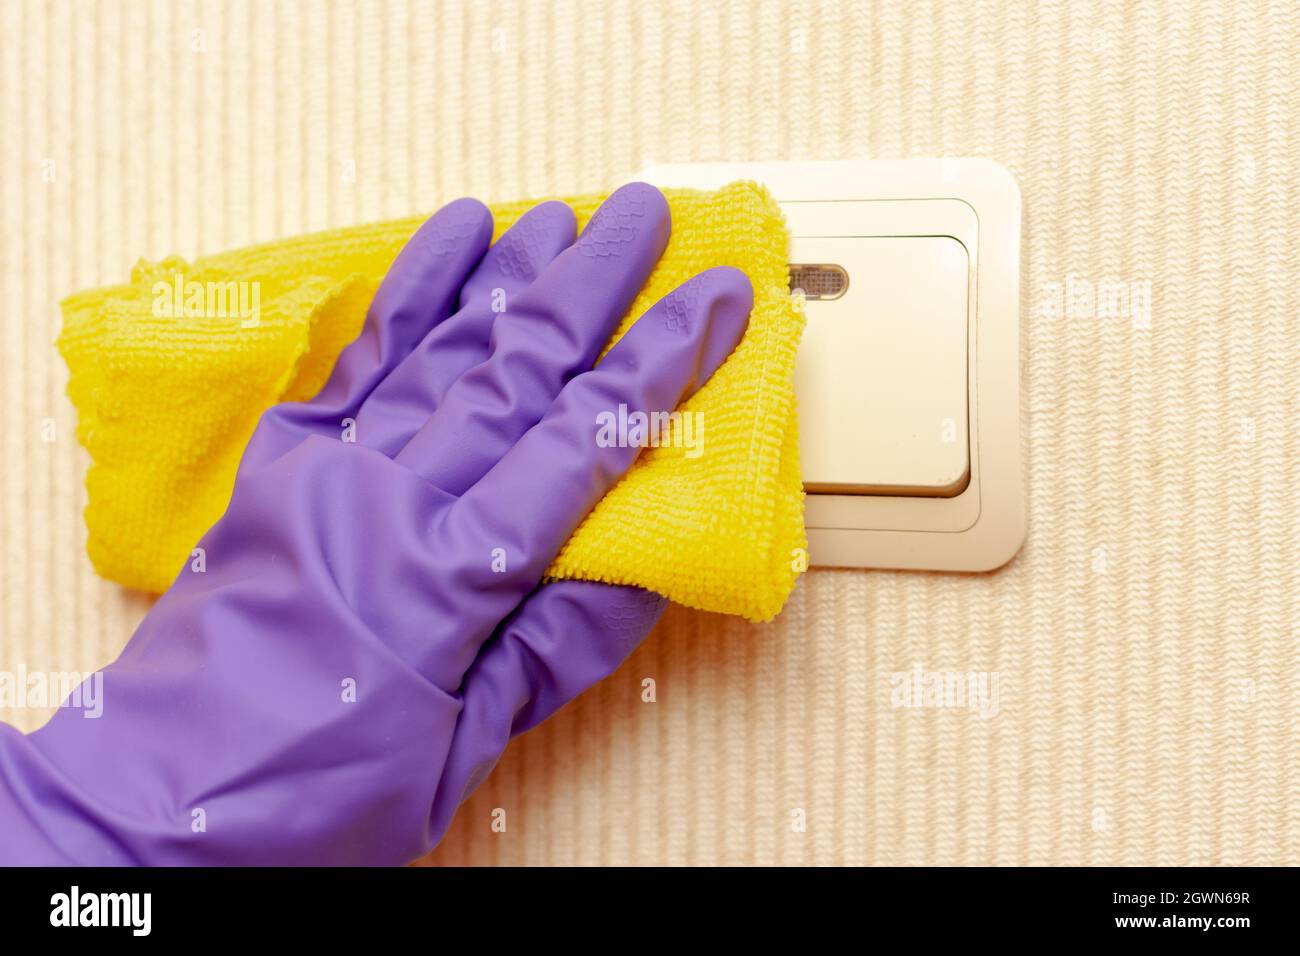 https://c8.alamy.com/comp/2GWN69R/female-hand-in-a-rubber-glove-disinfects-the-room-switch-2GWN69R.jpg